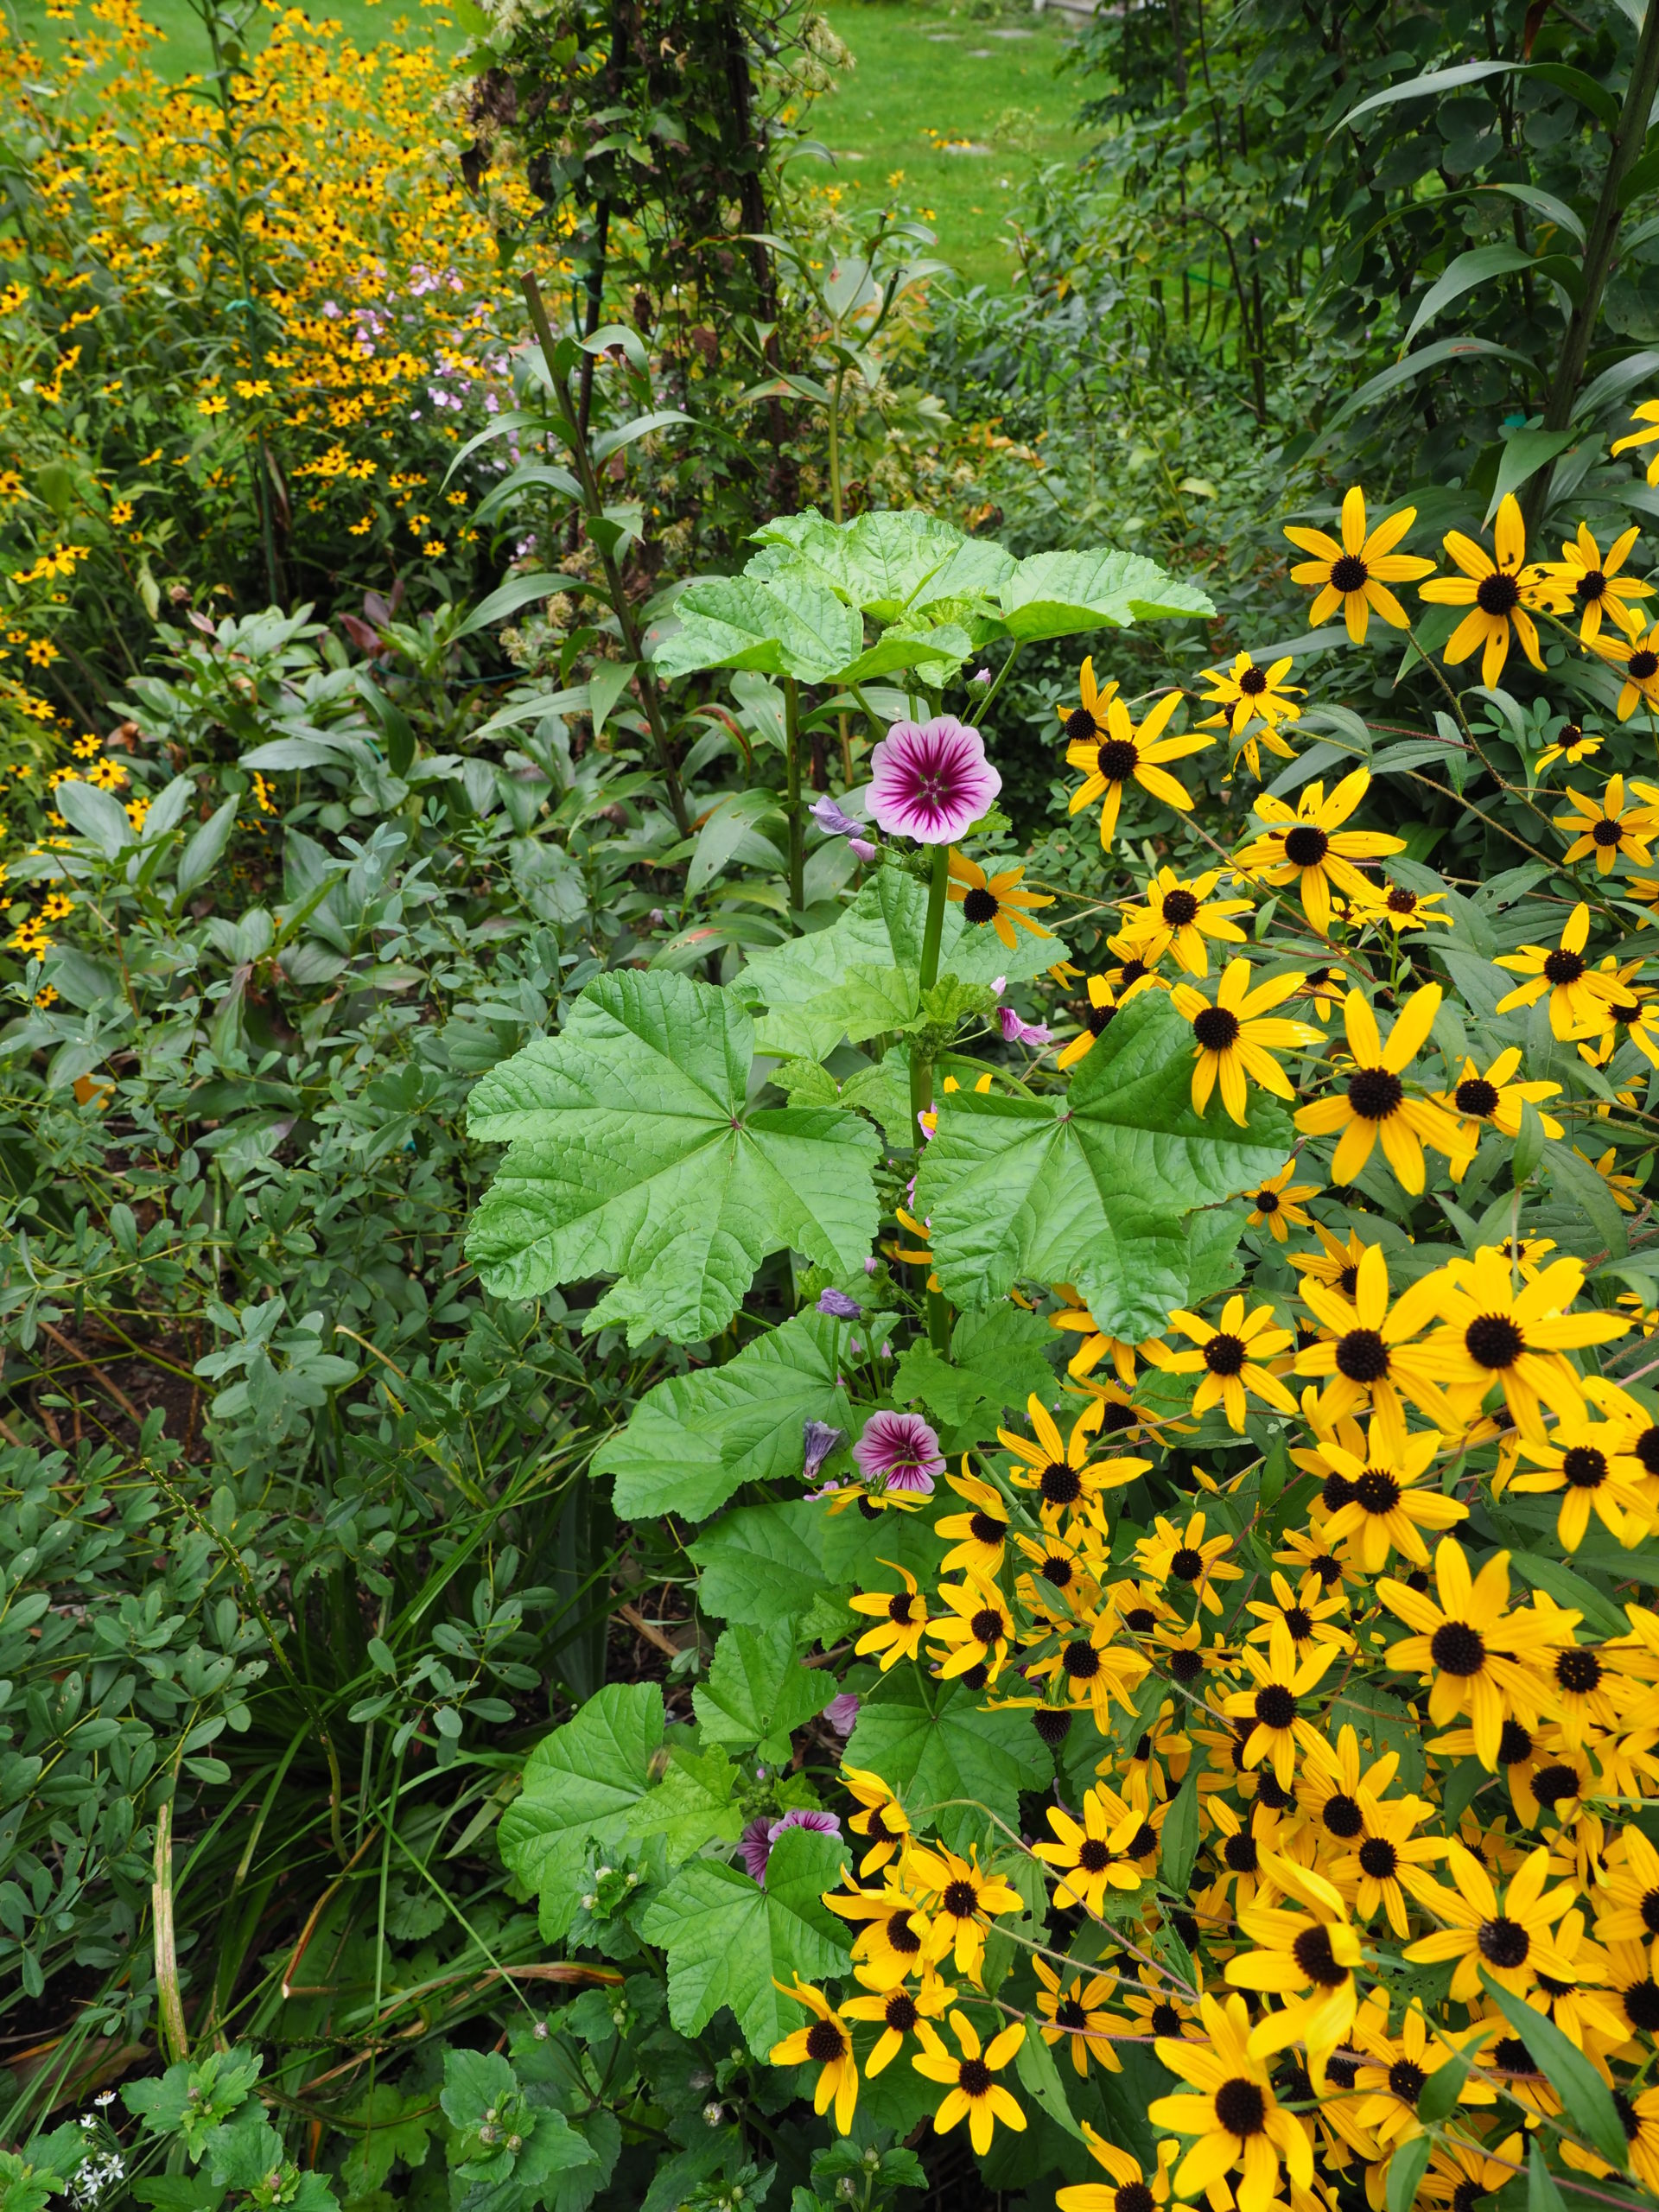 Often growing as tall as 5 feet, this A. zebrina blooms up the center stem. A single seed from years ago germinated to provide this wonderful plant next to Rudbeckia triloba.